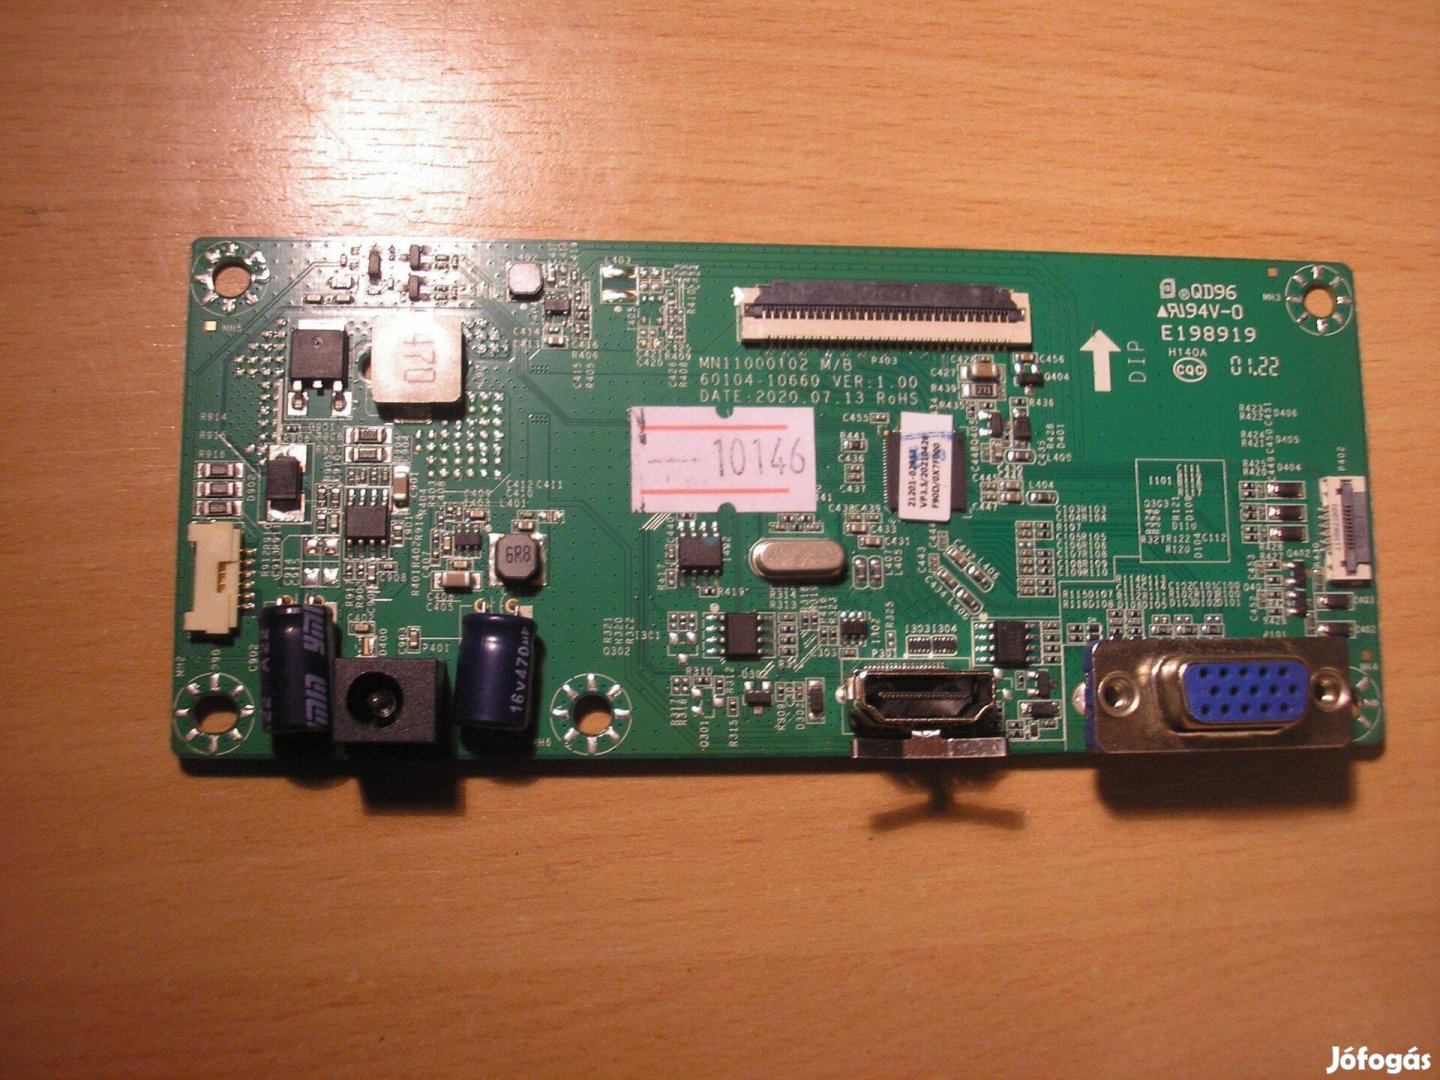 10146 Huawei Ad80HW mainboard MN11000102 60104-10660 VER: 1.00 SP1Ad80